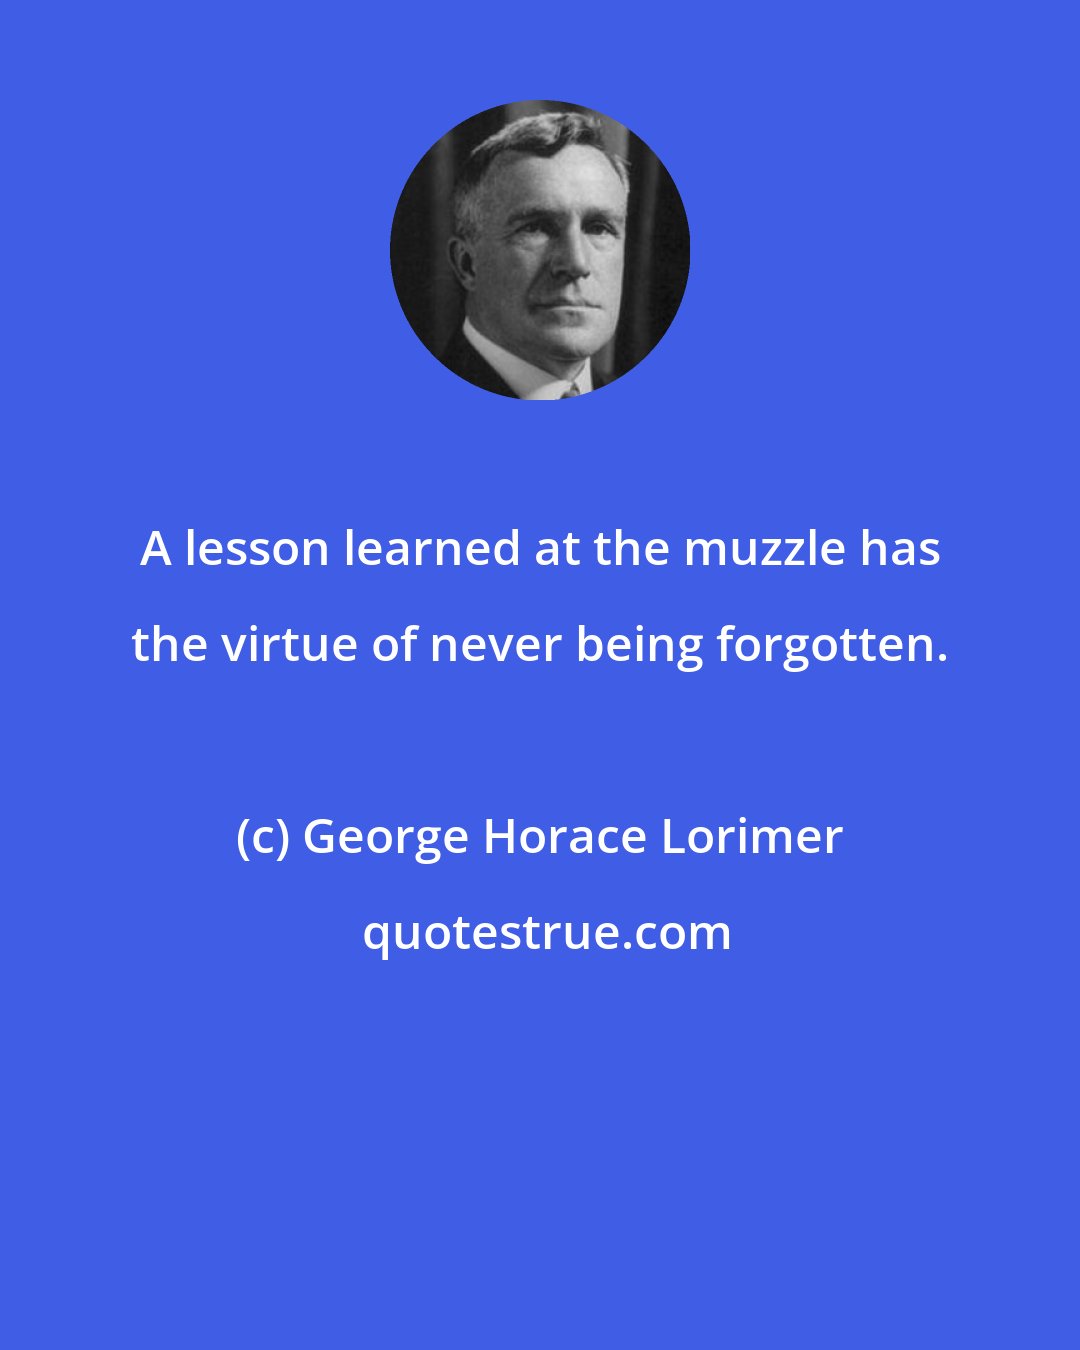 George Horace Lorimer: A lesson learned at the muzzle has the virtue of never being forgotten.